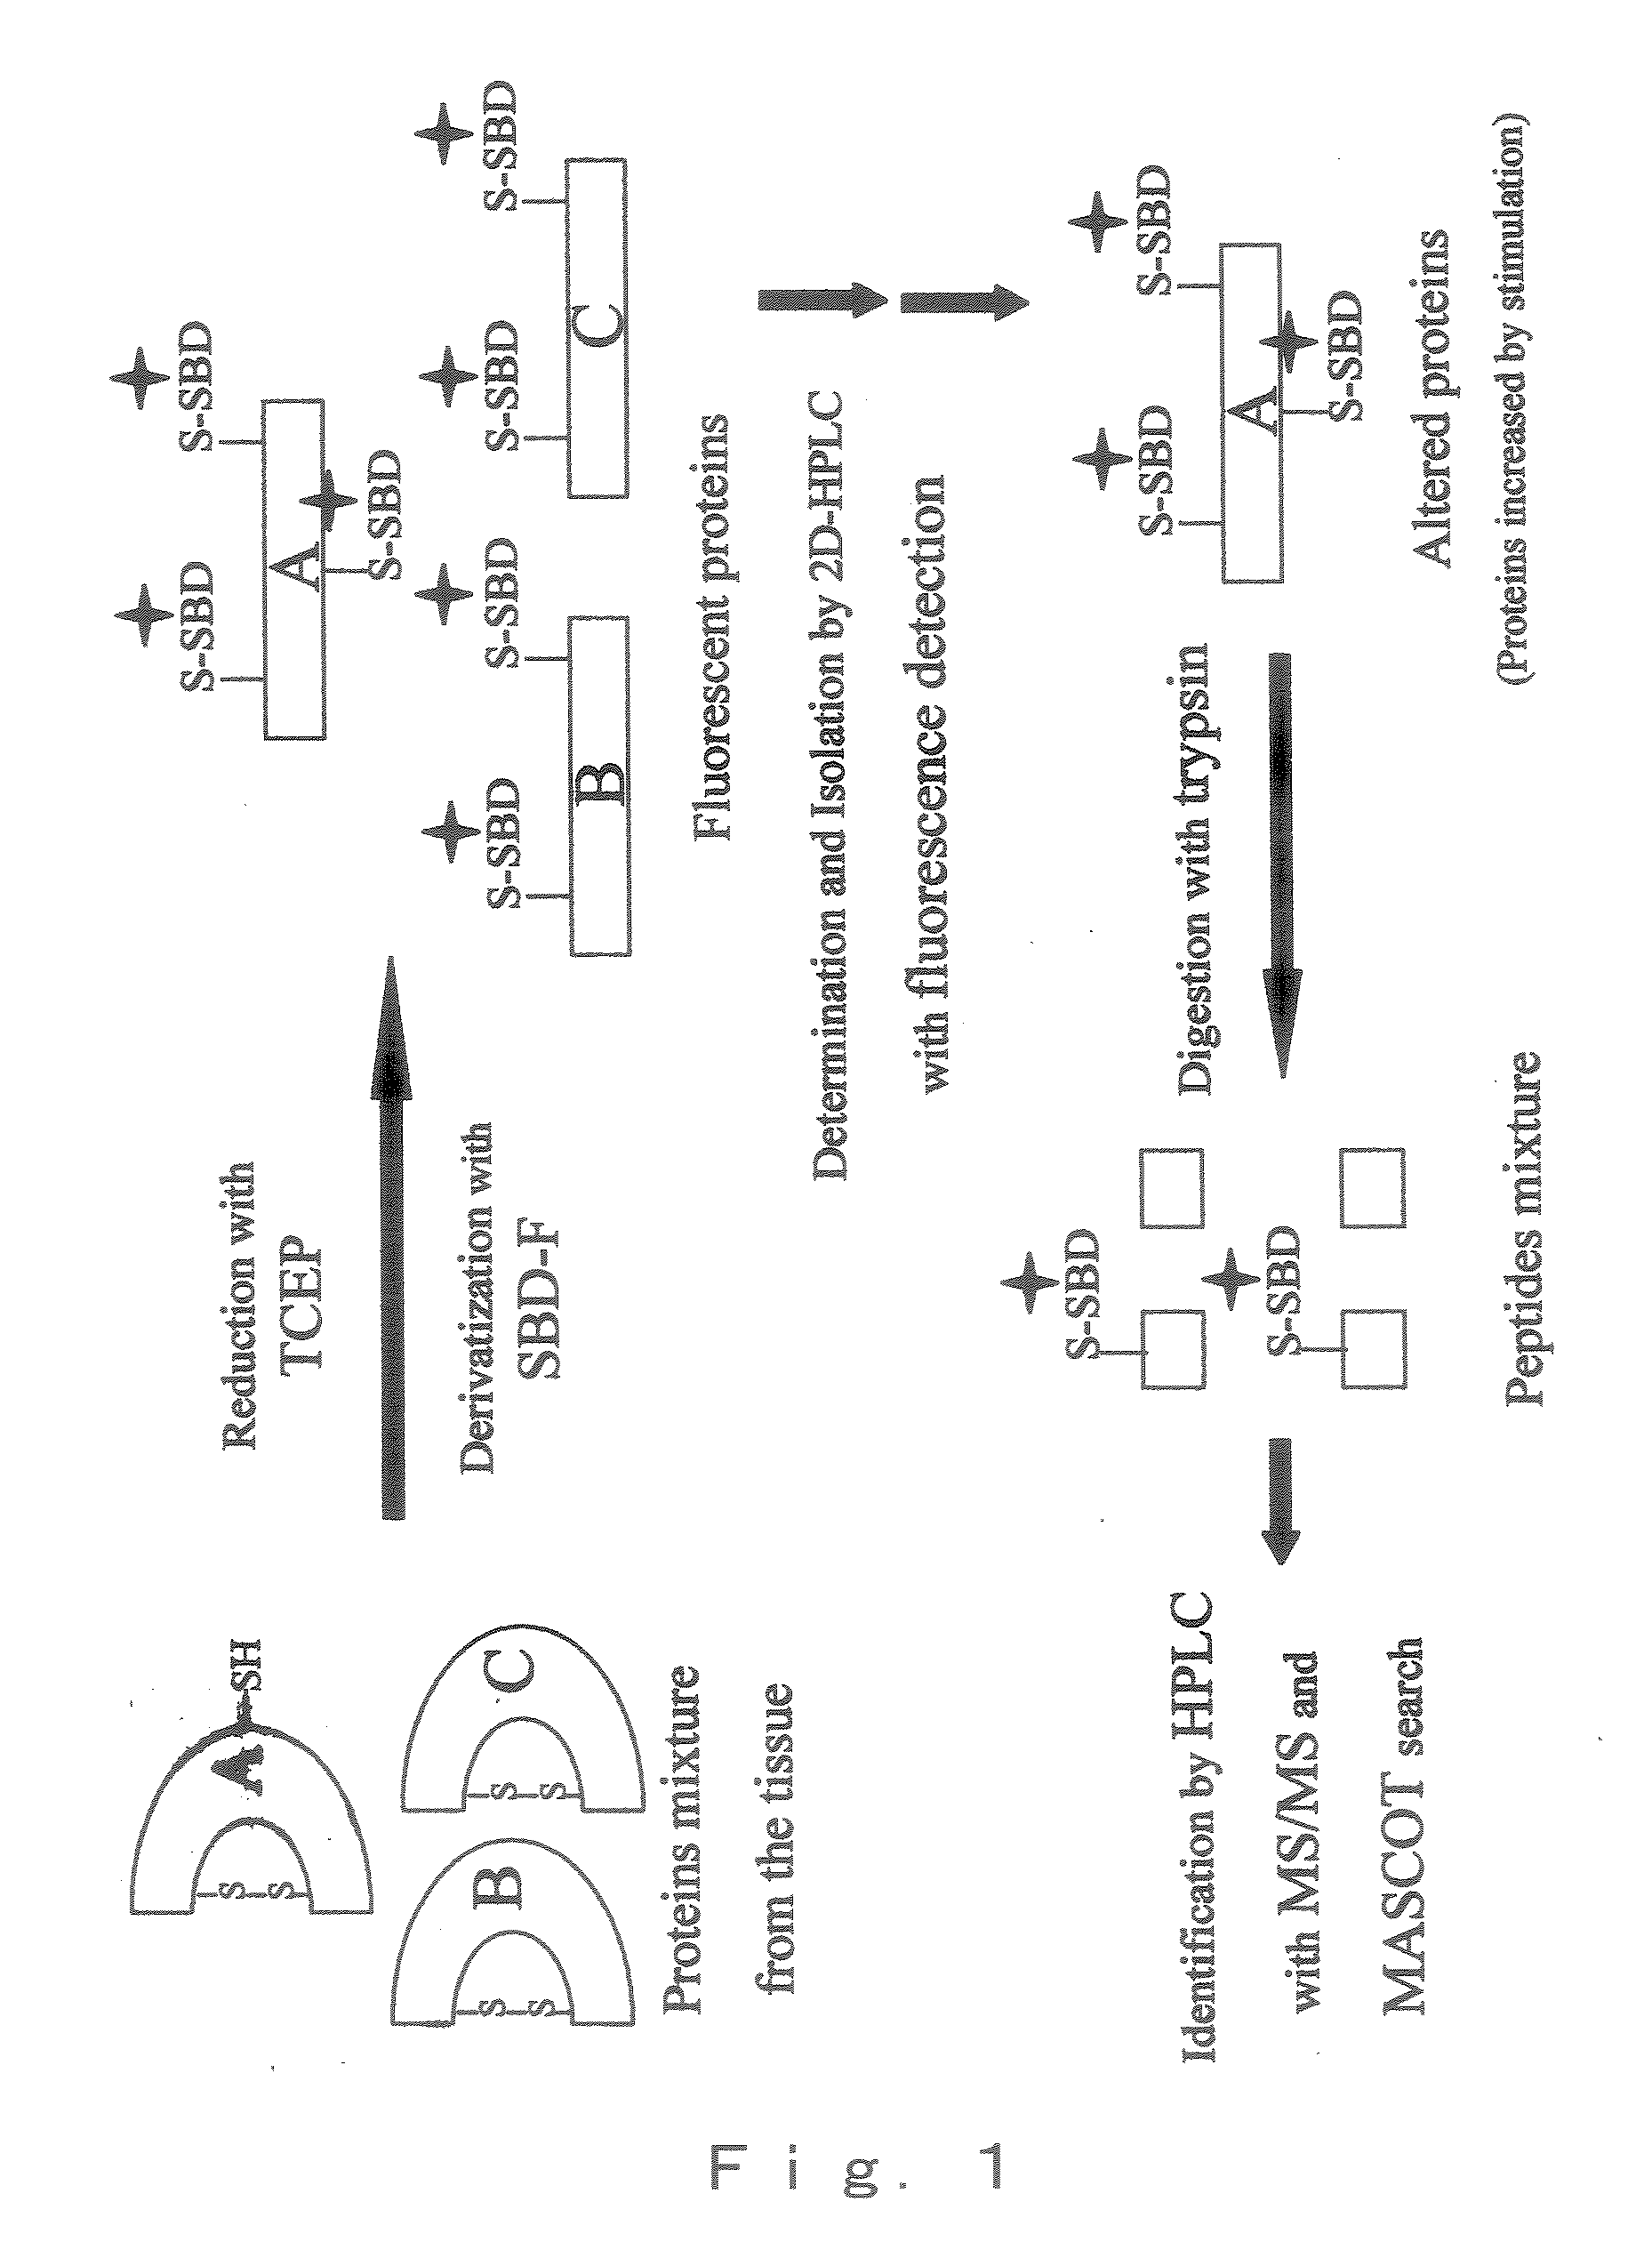 Method of Detection, Separation and Identification for Expressed Trace Protein/Peptide